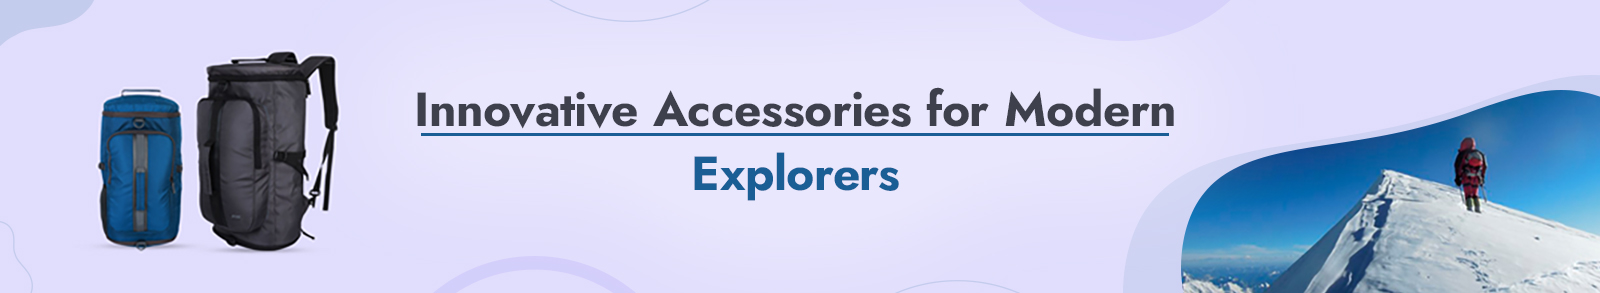 Innovative Accessories for Modern Explorers